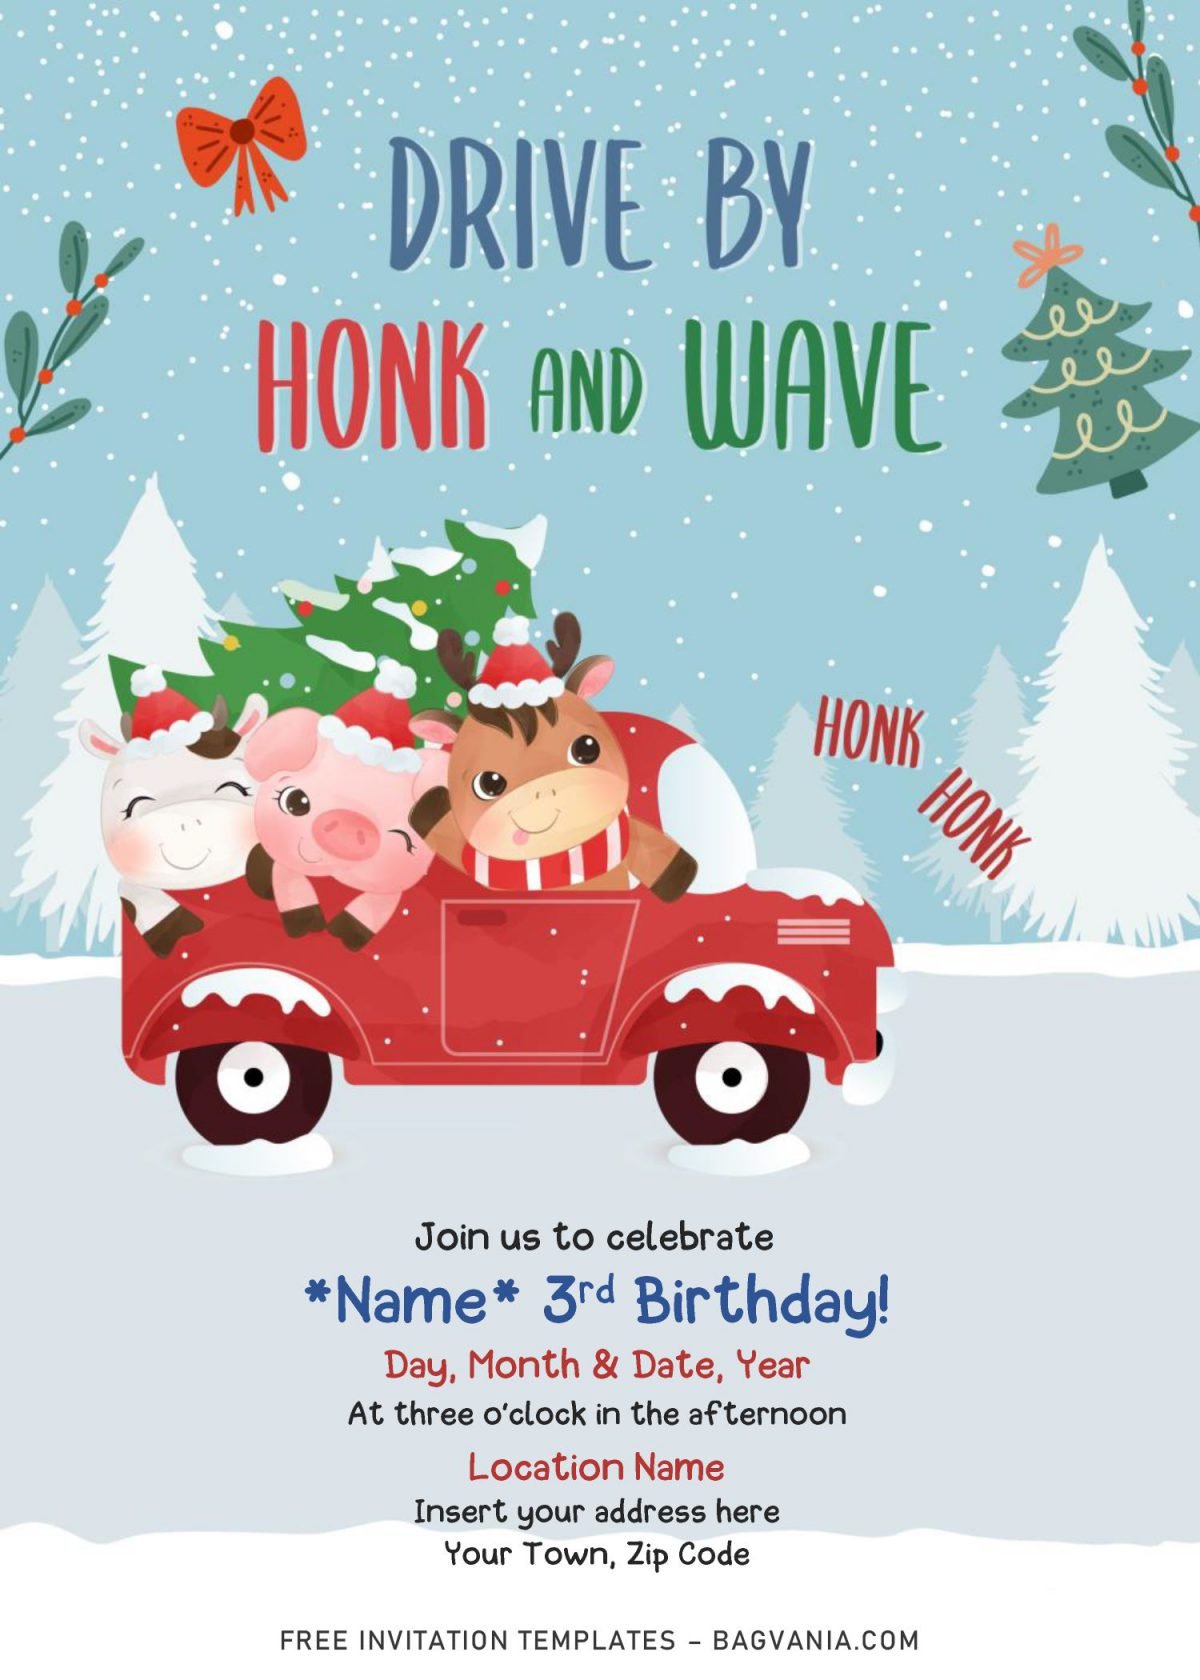 Free Winter Red Truck Drive By Birthday Party Invitation Templates For Word and has cute Cow and Pig